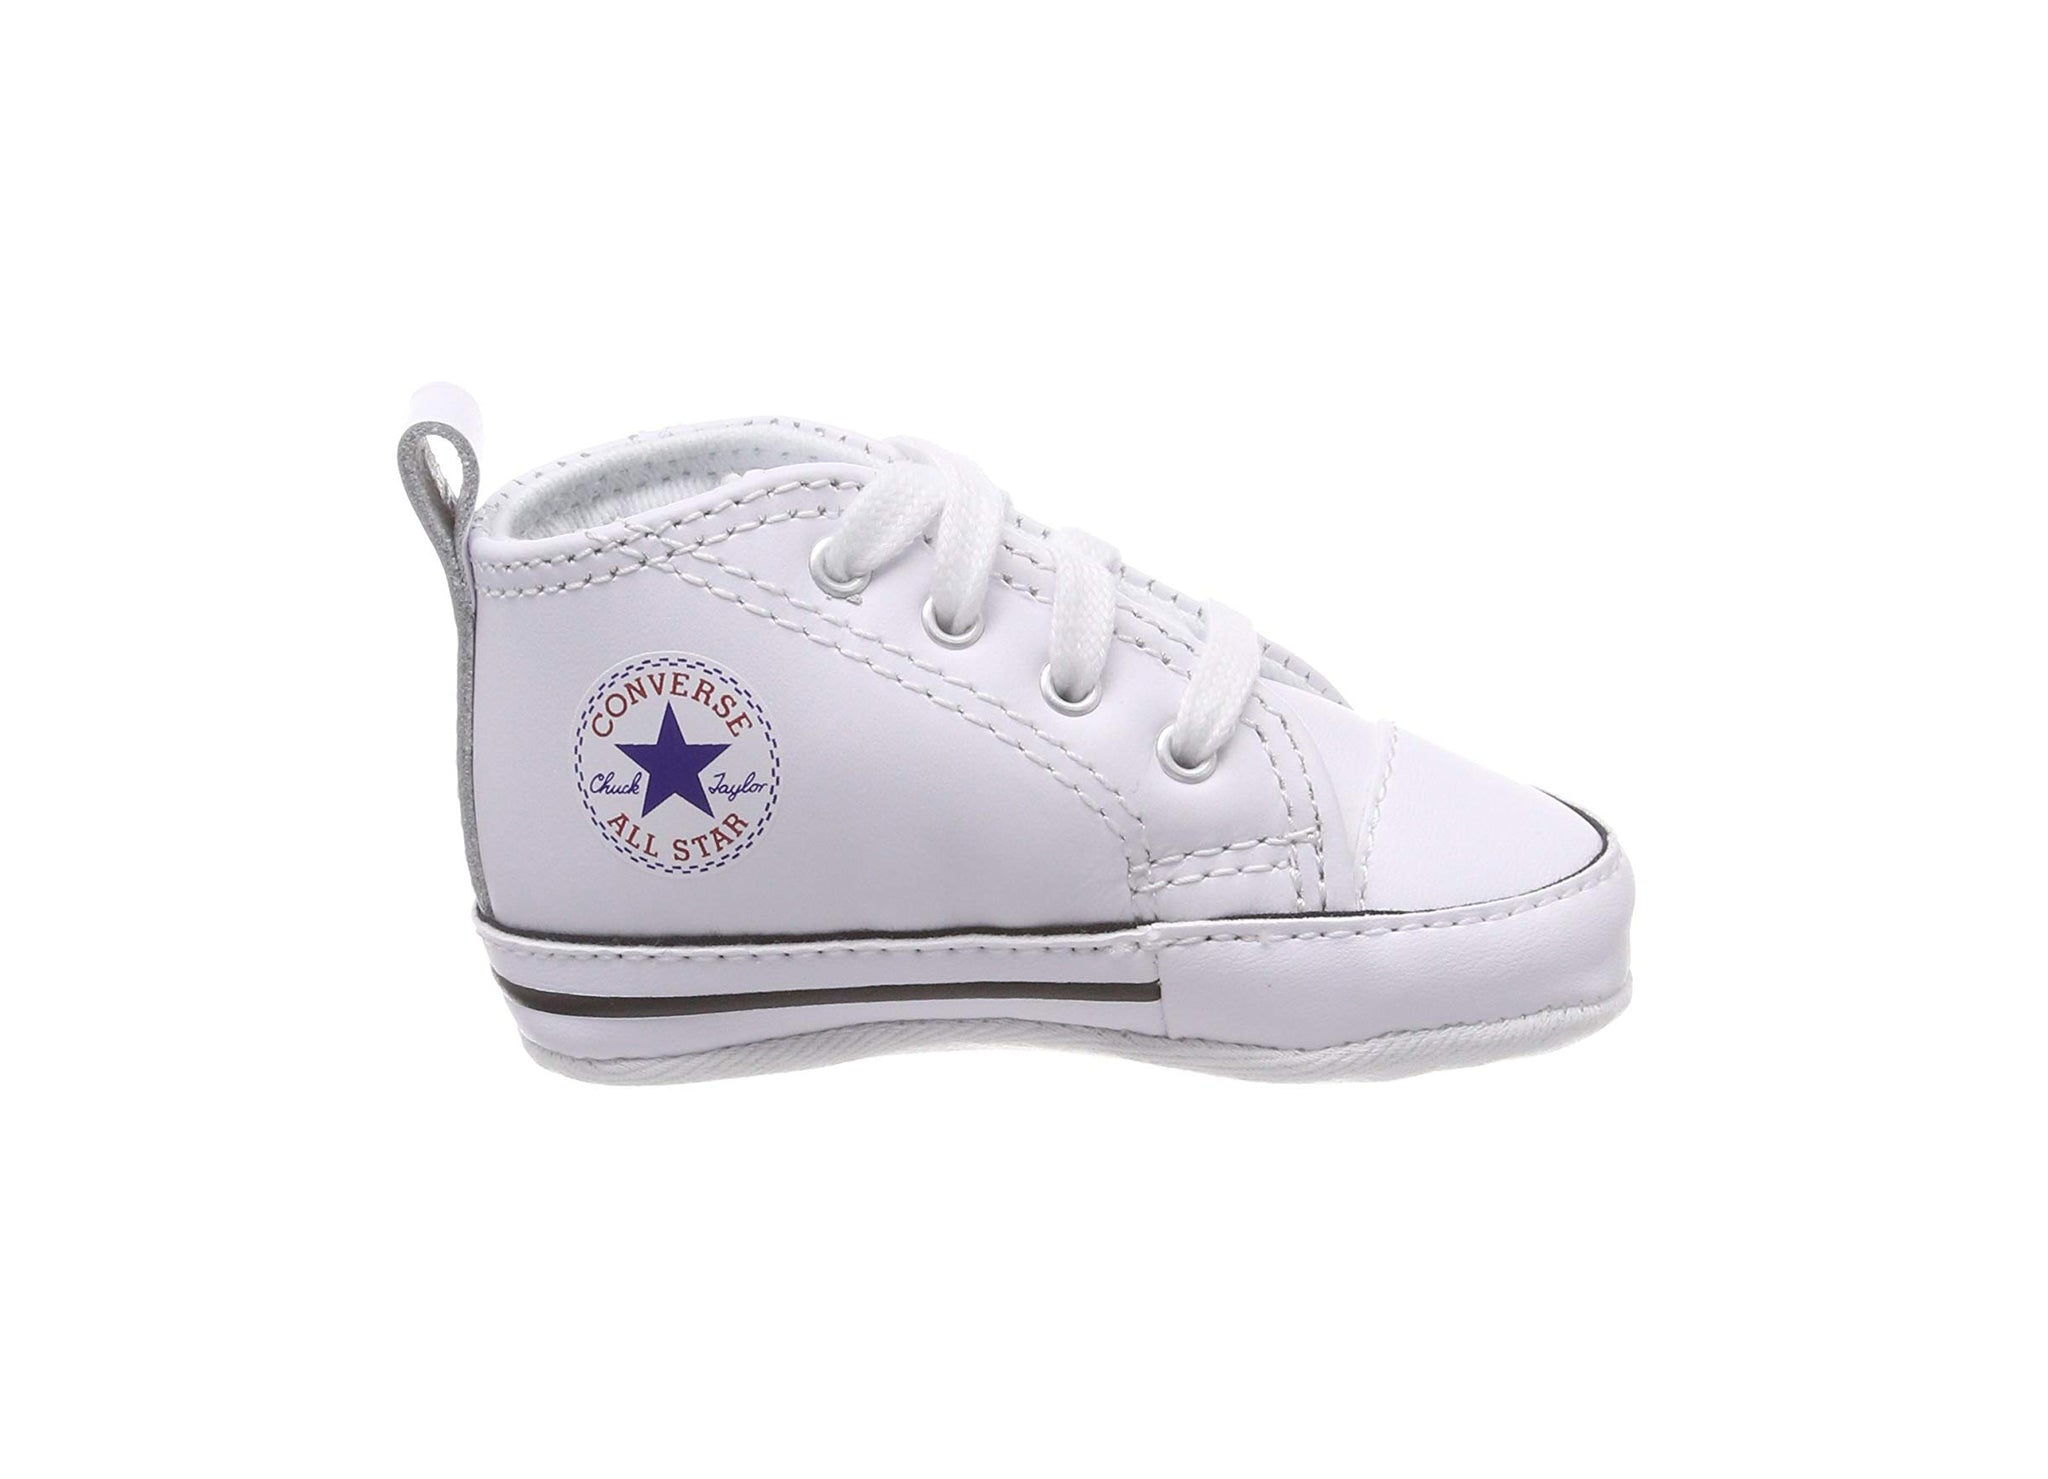 Converse First Star White Leather Hi Top Crib Shoes